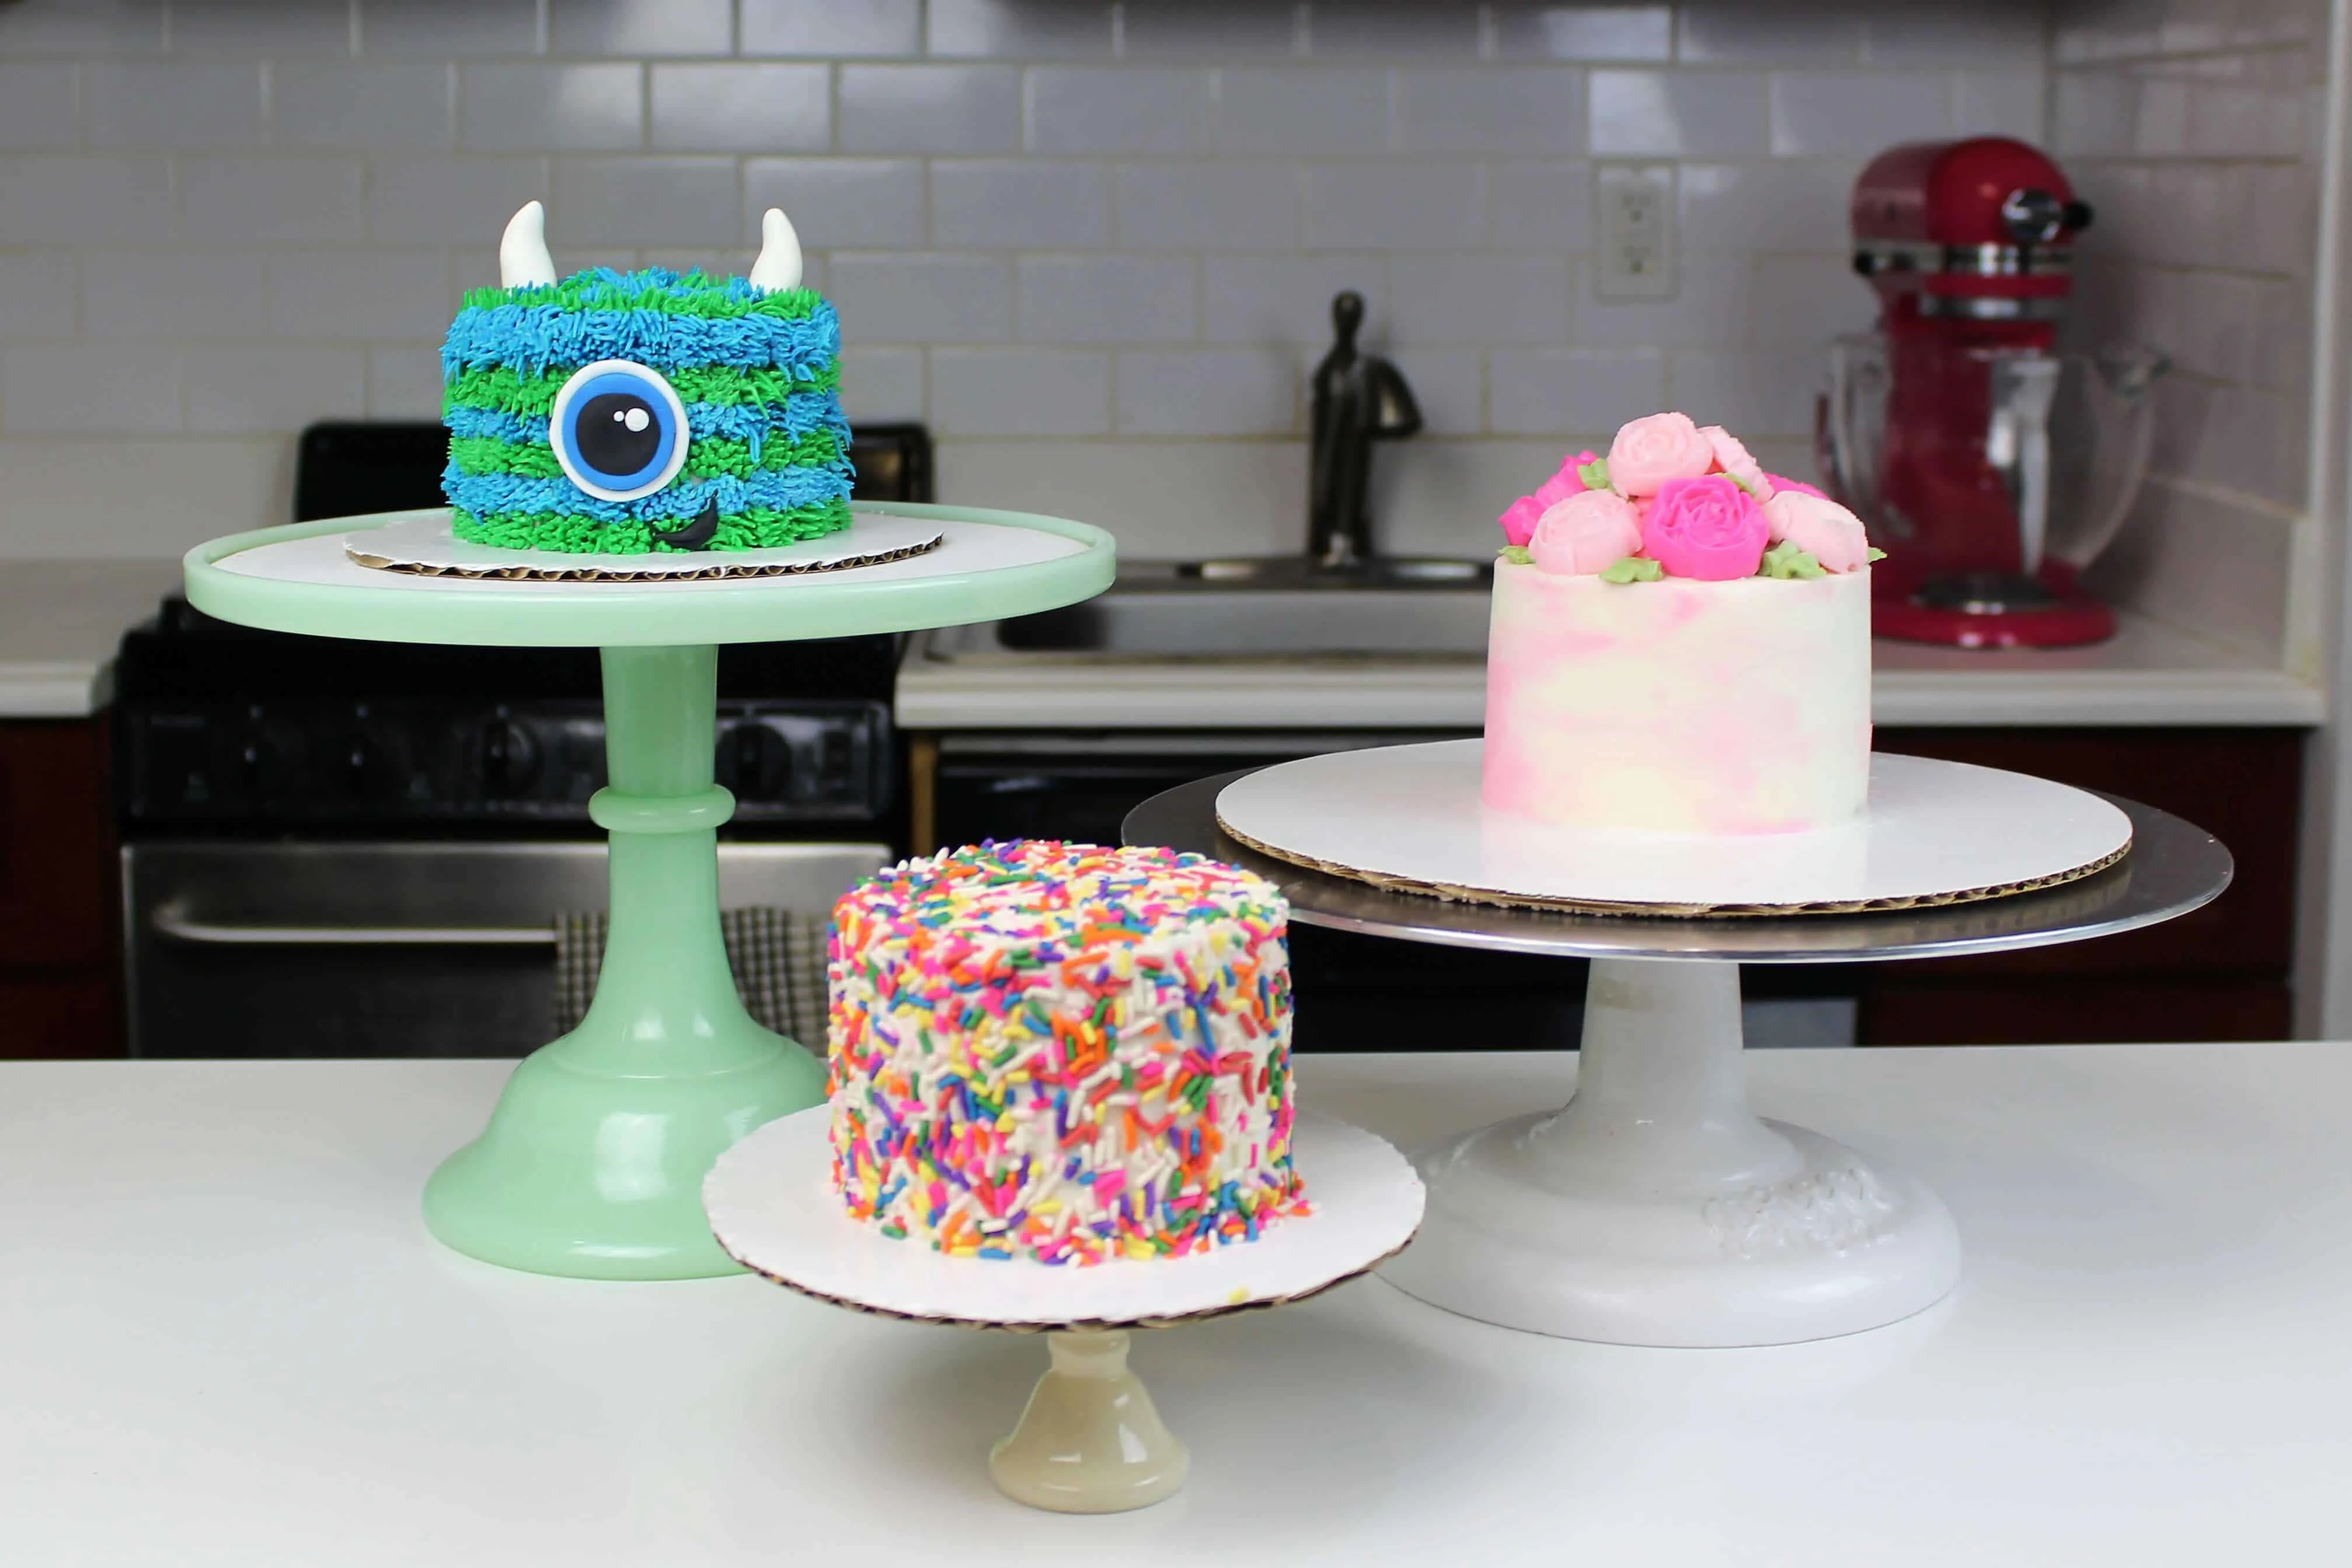 The Best Guide for Basic Cake Decorating | Foodal